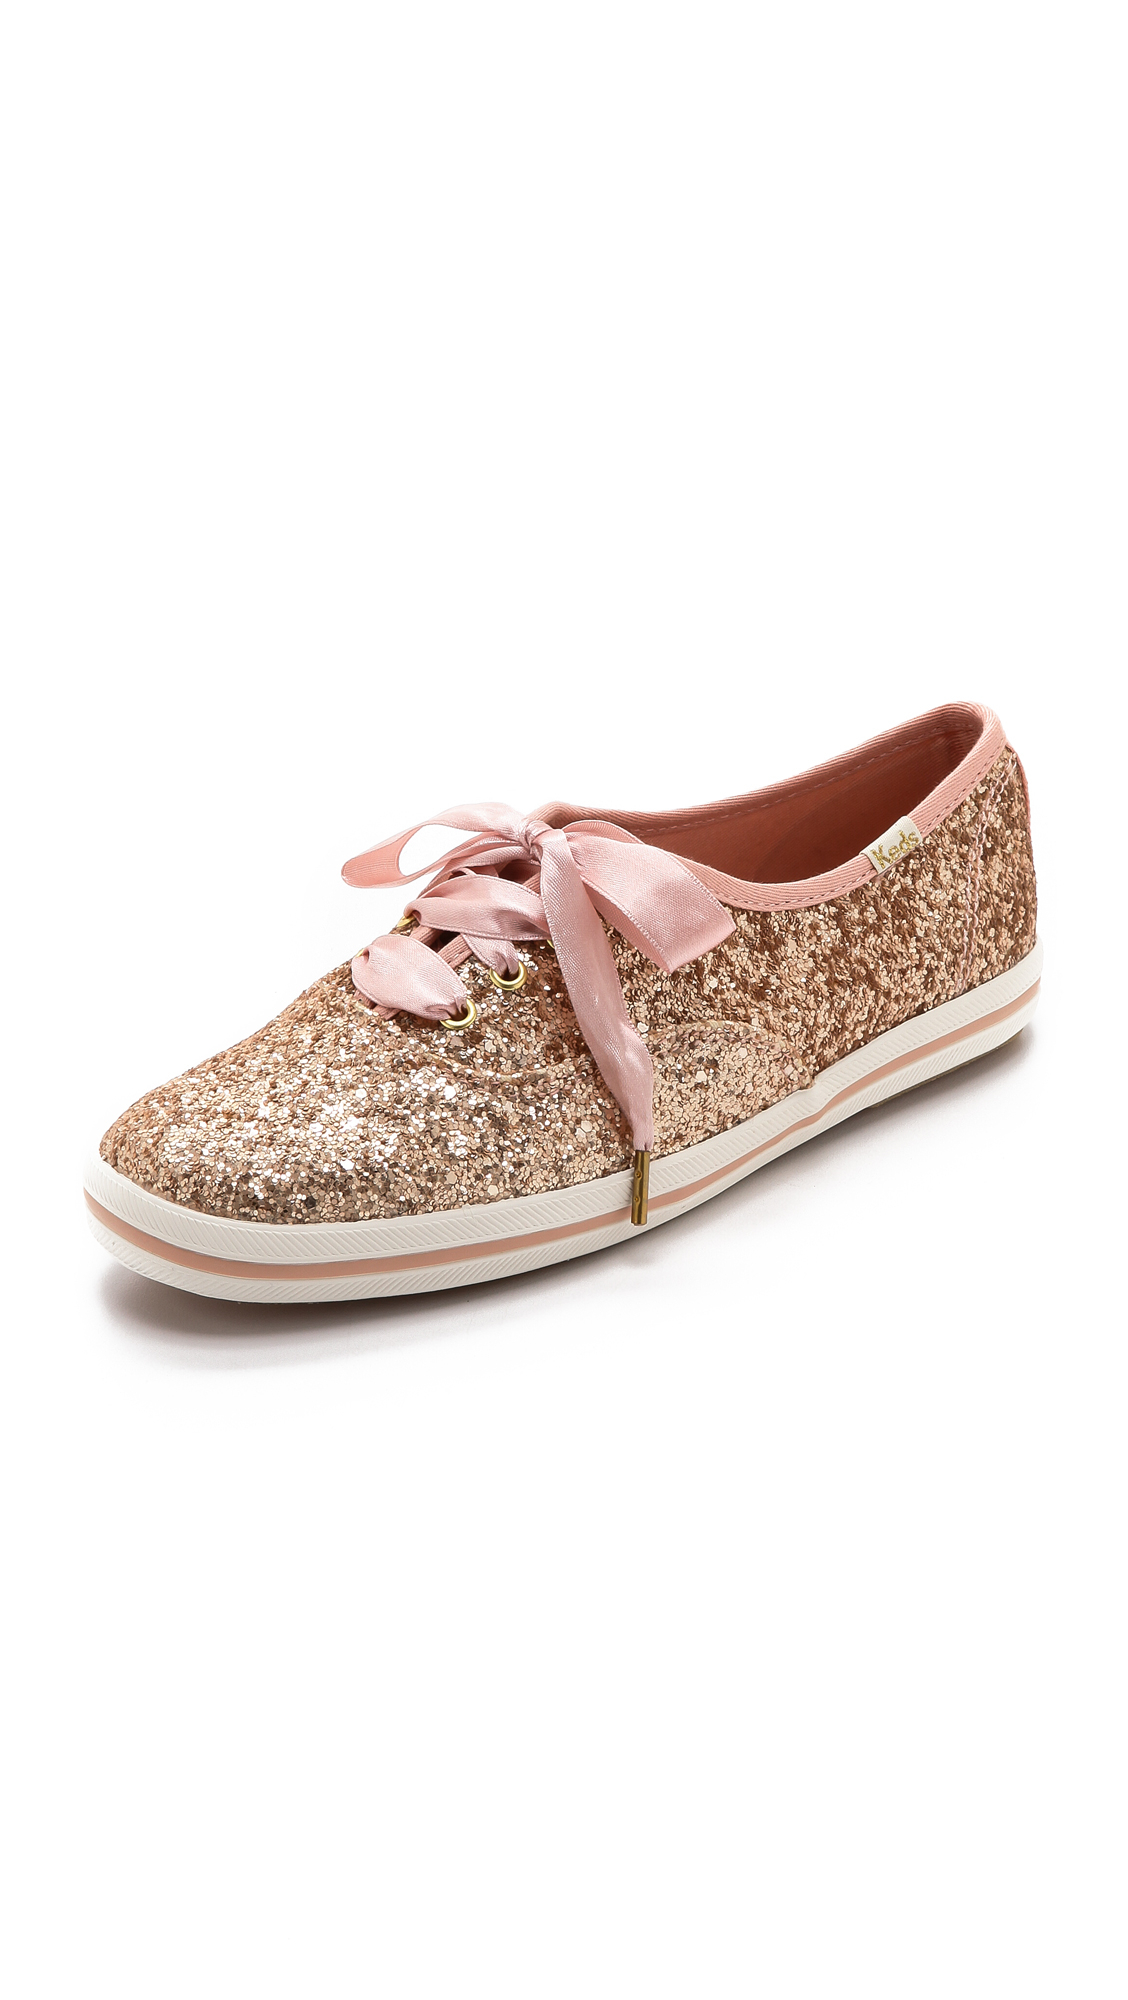 Lyst - Kate Spade New York Keds For Kate Spade Giltter Sneakers ...